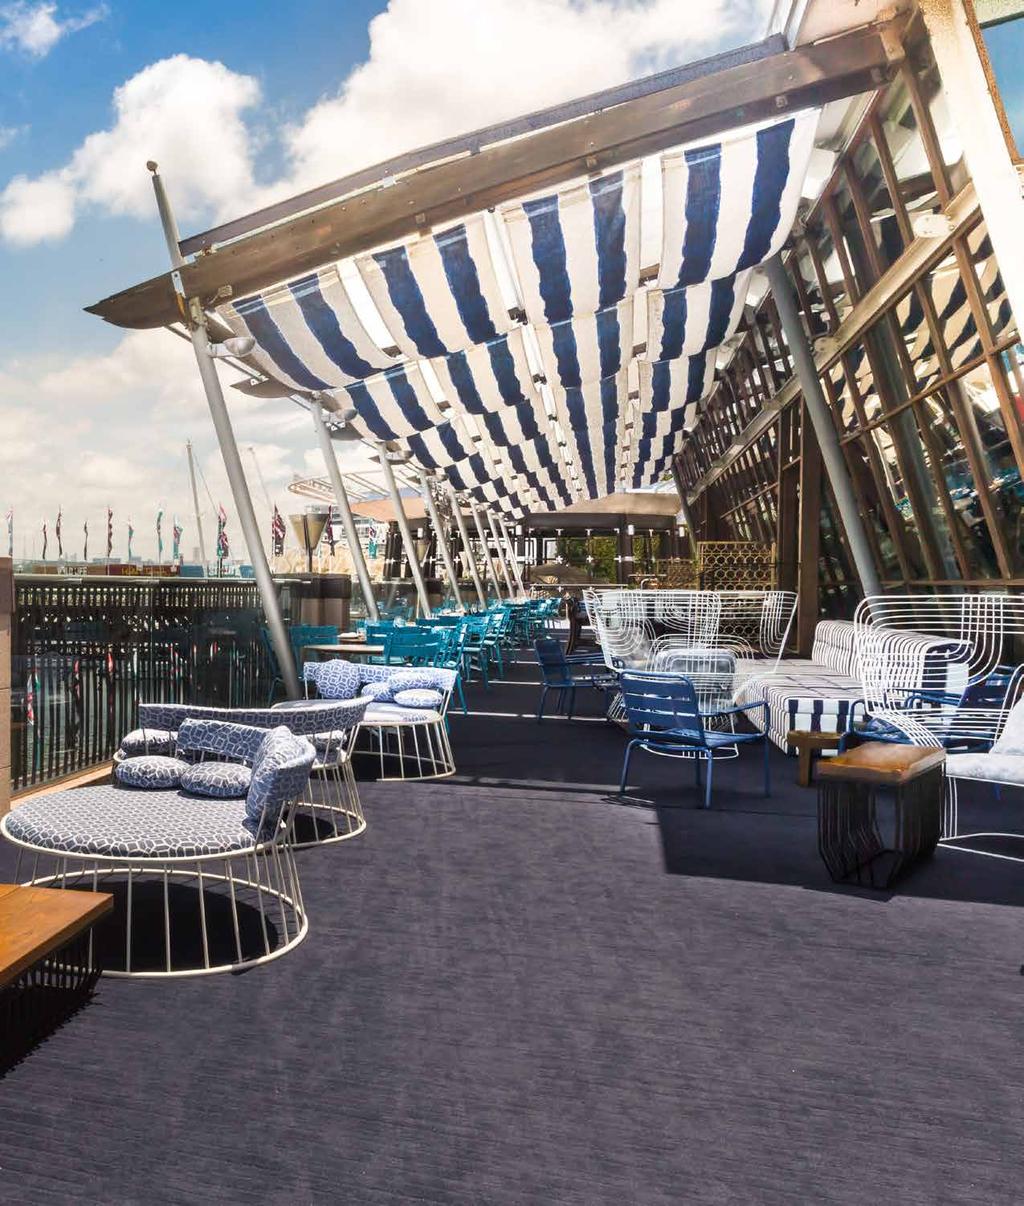 CAFÉ DEL MAR SYDNEY Café del Mar Sydney is part of a global brand, with popular venues around the world famous for spectacular sunset views, premium food and drinks, and their globally loved Café del